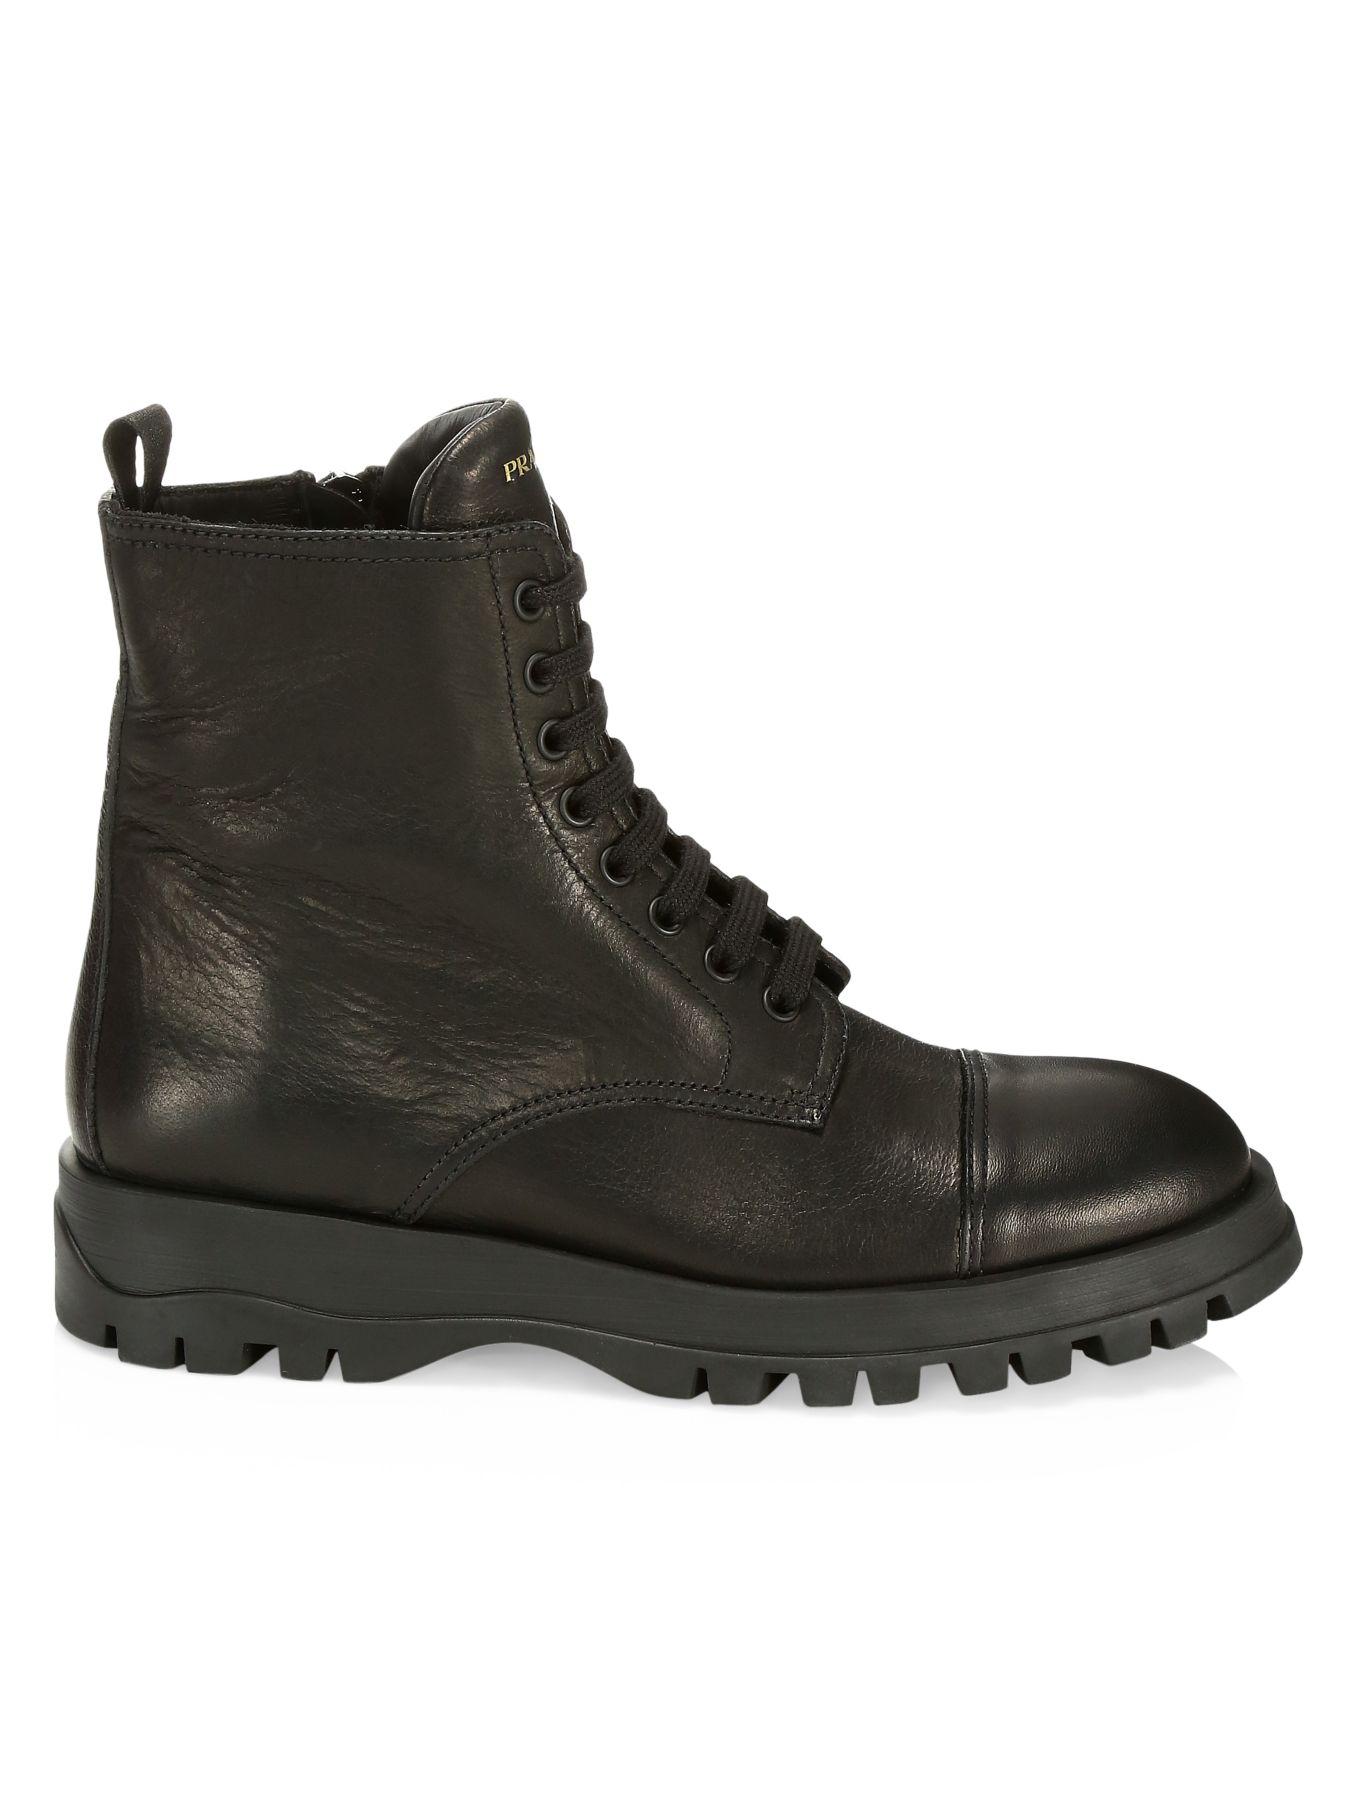 Prada Leather Lace-up Combat Boot in Black - Save 60% - Lyst